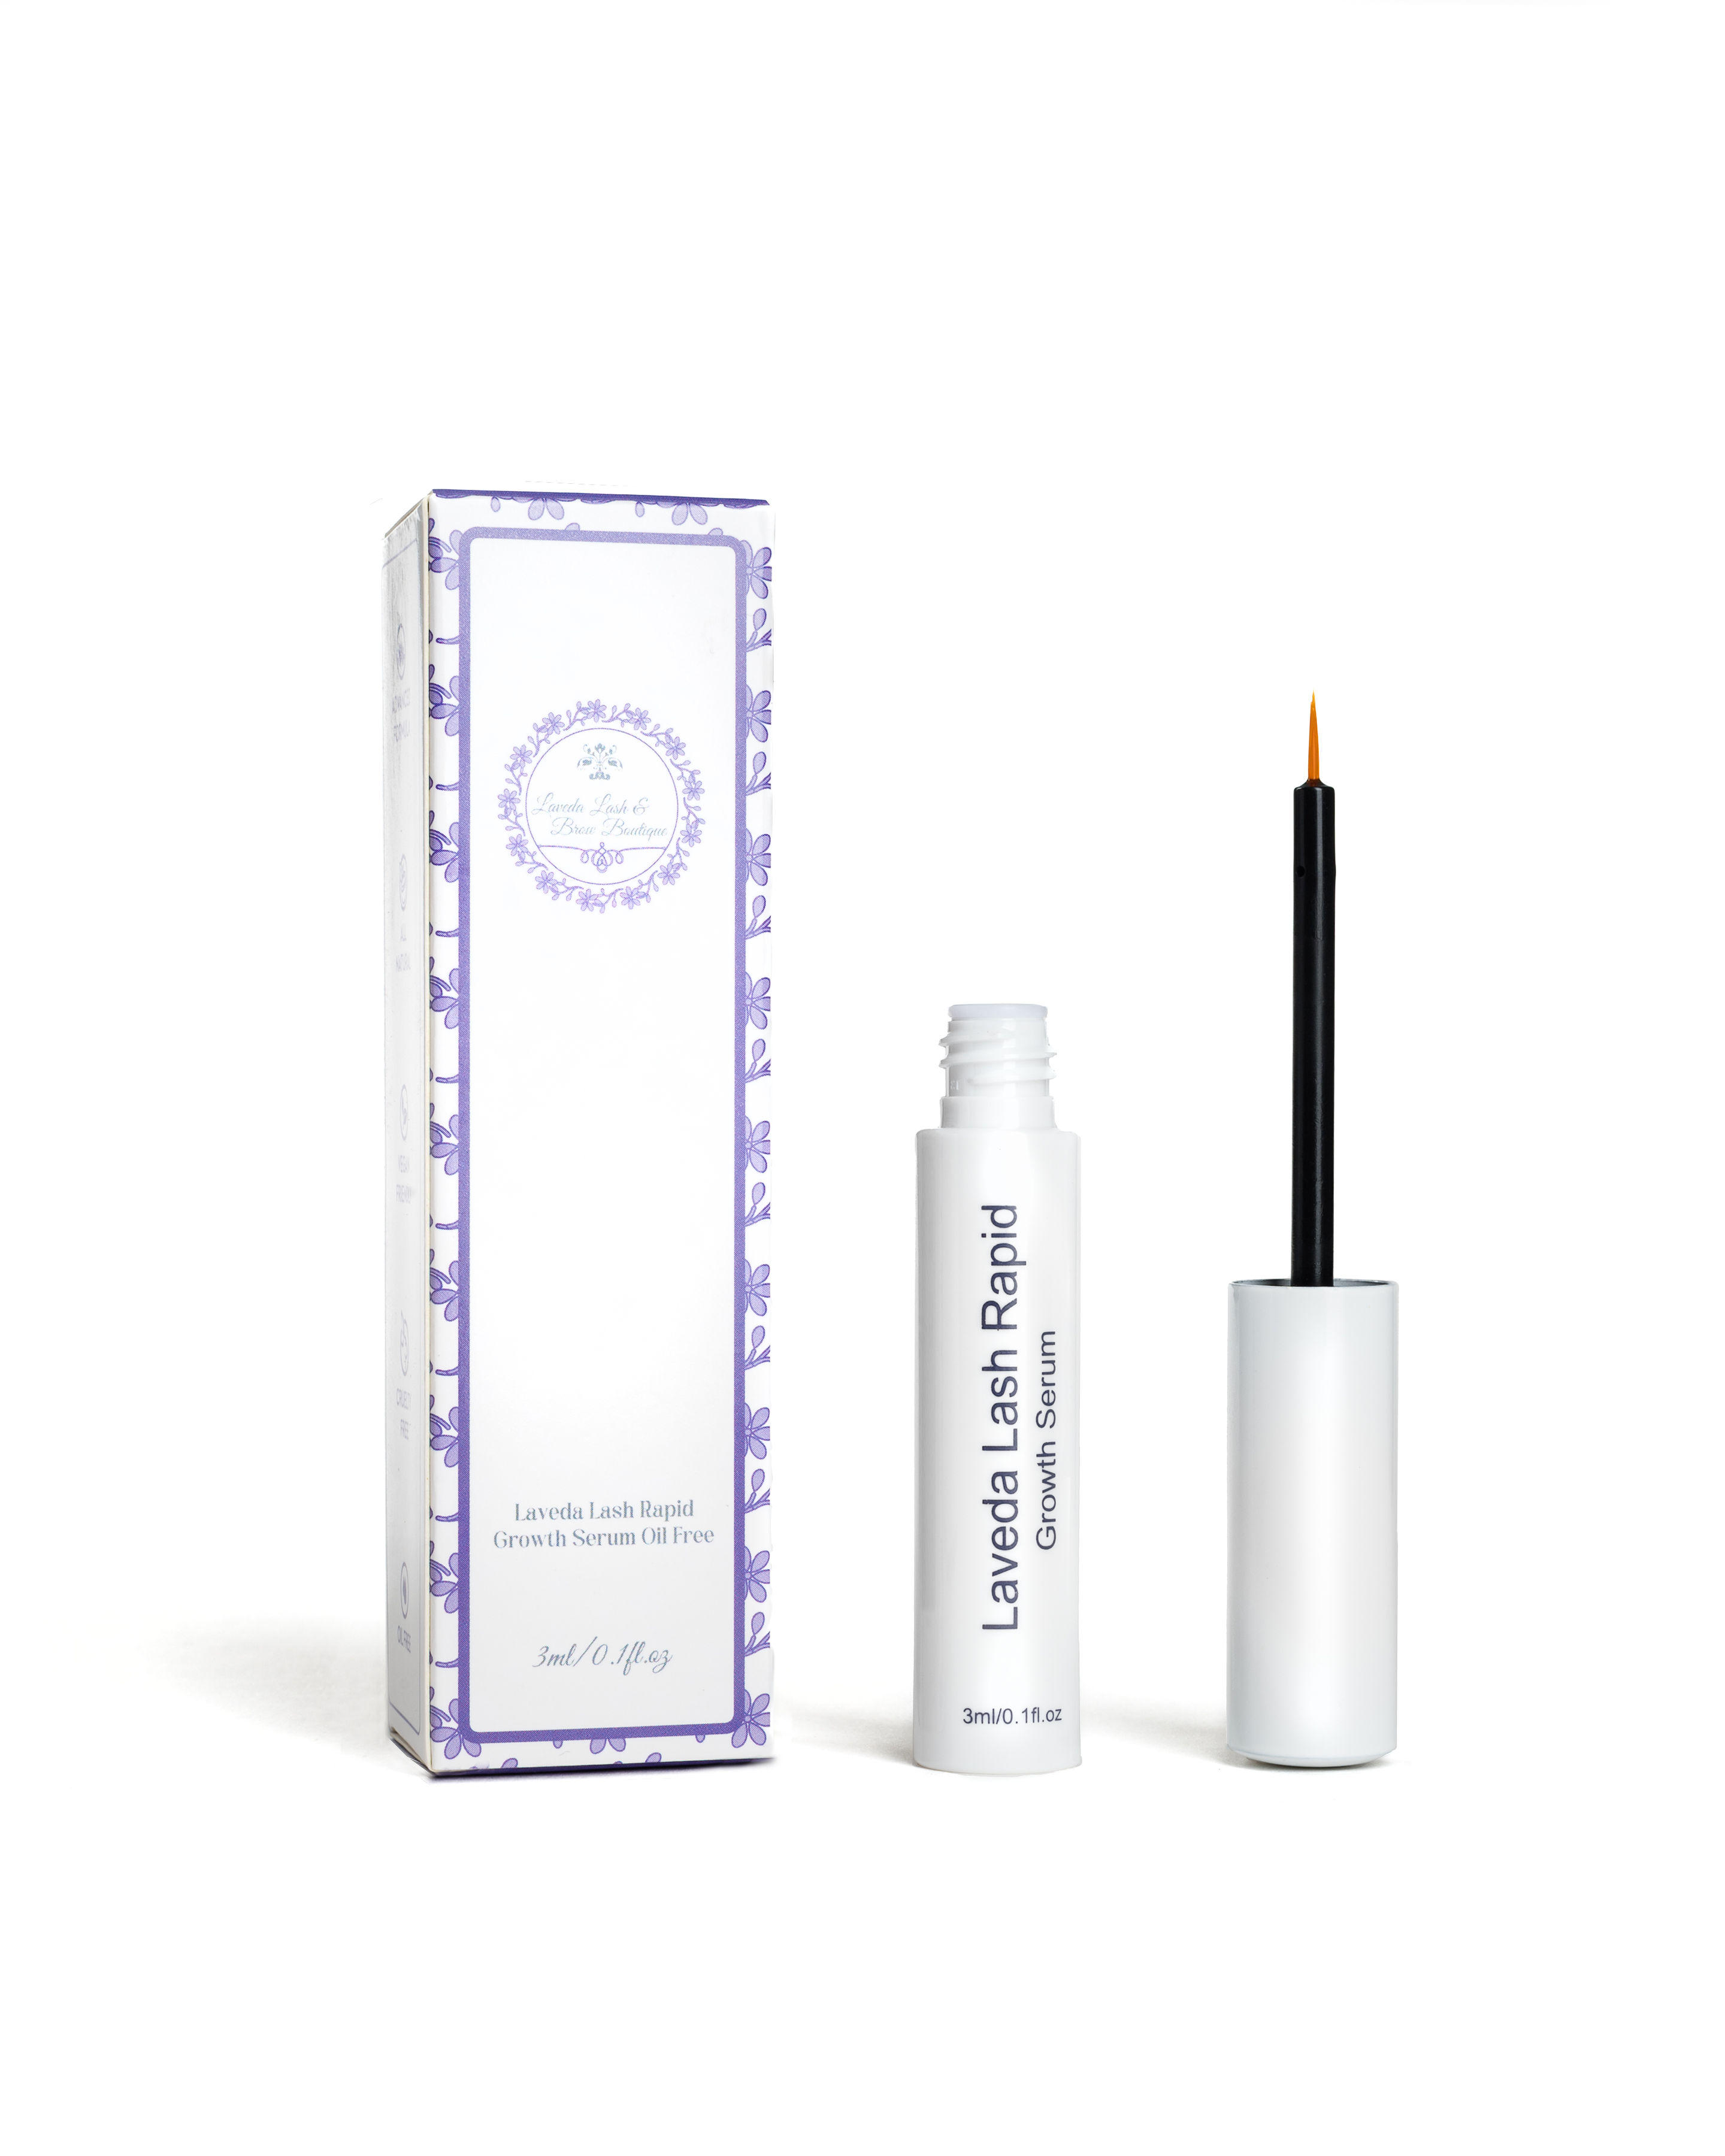 LAVEDA Premium Eyelash Growth Serum NEW FORMULA - Grow Lashes and Brows - Boosts Natural Lash Growth for Thicker, Fuller Lashes and Eyebrows